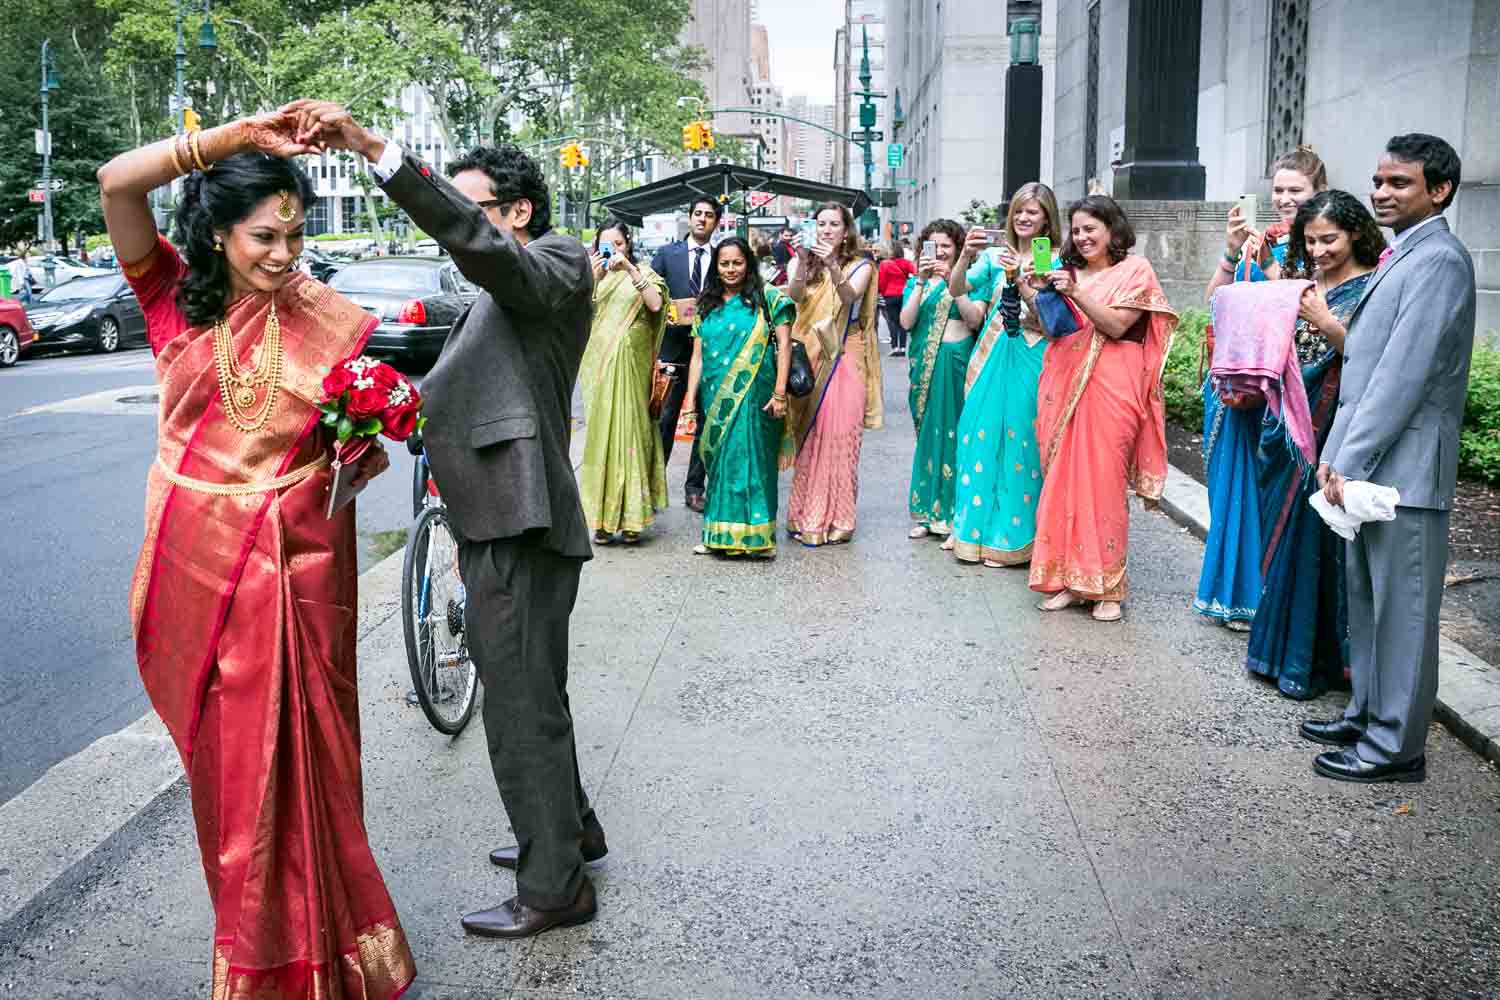 Bride and groom dancing in front of bridal party wearing traditional saris